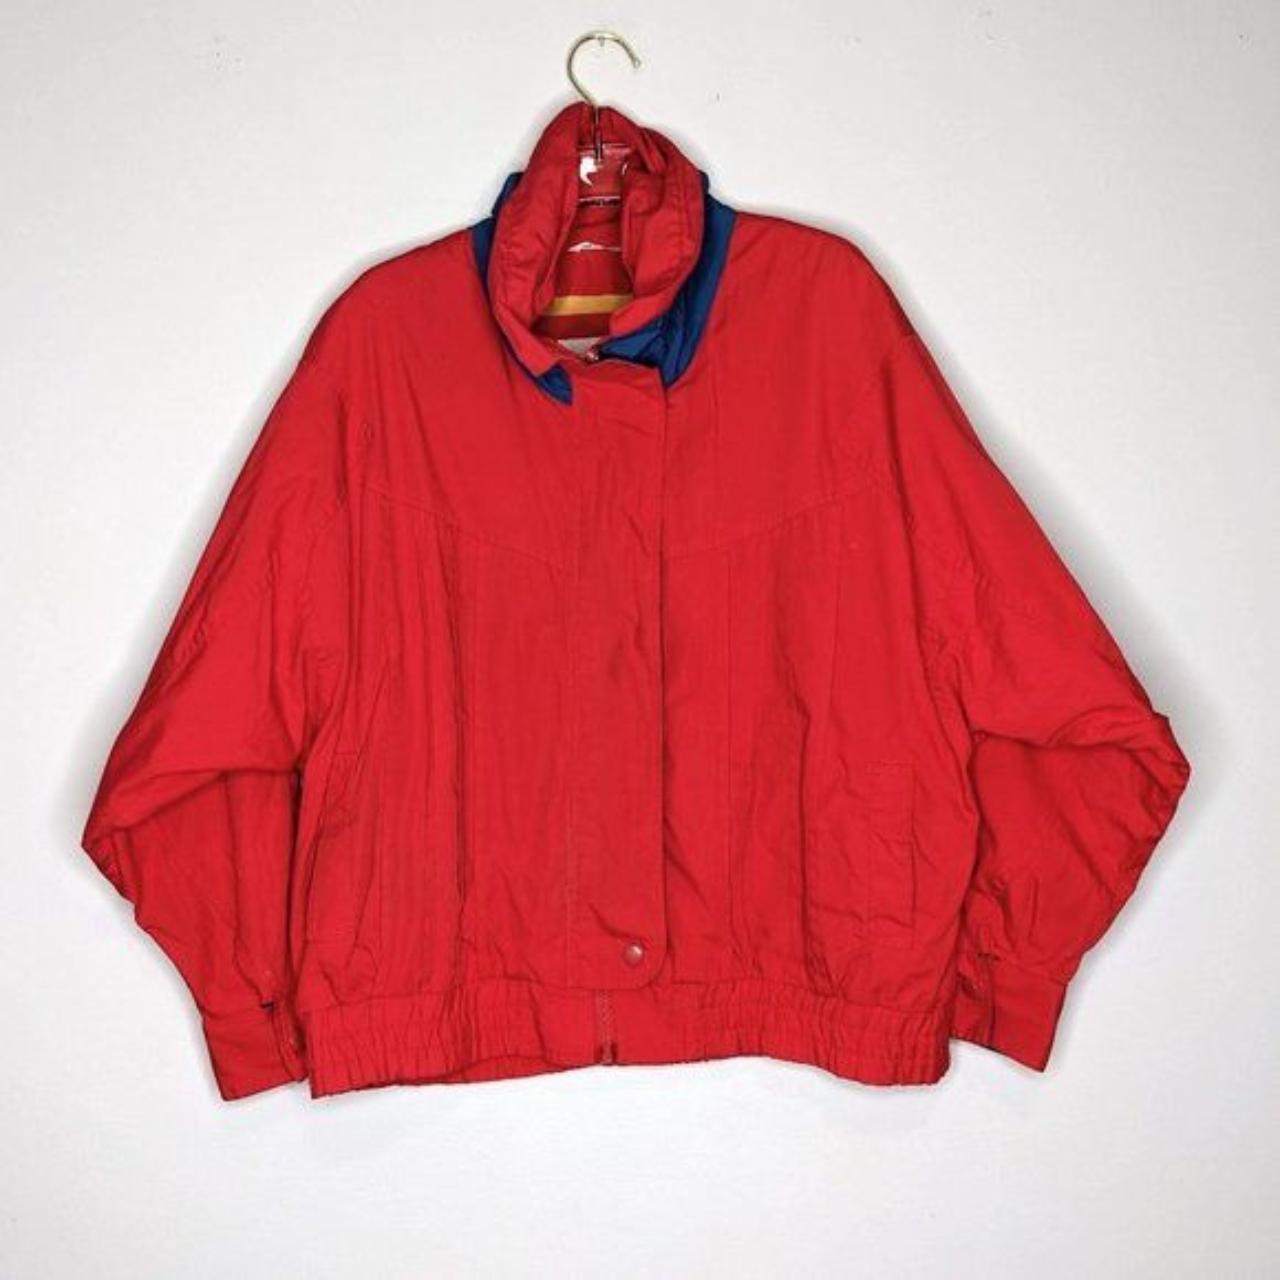 Gitano Men's Red and Blue Jacket